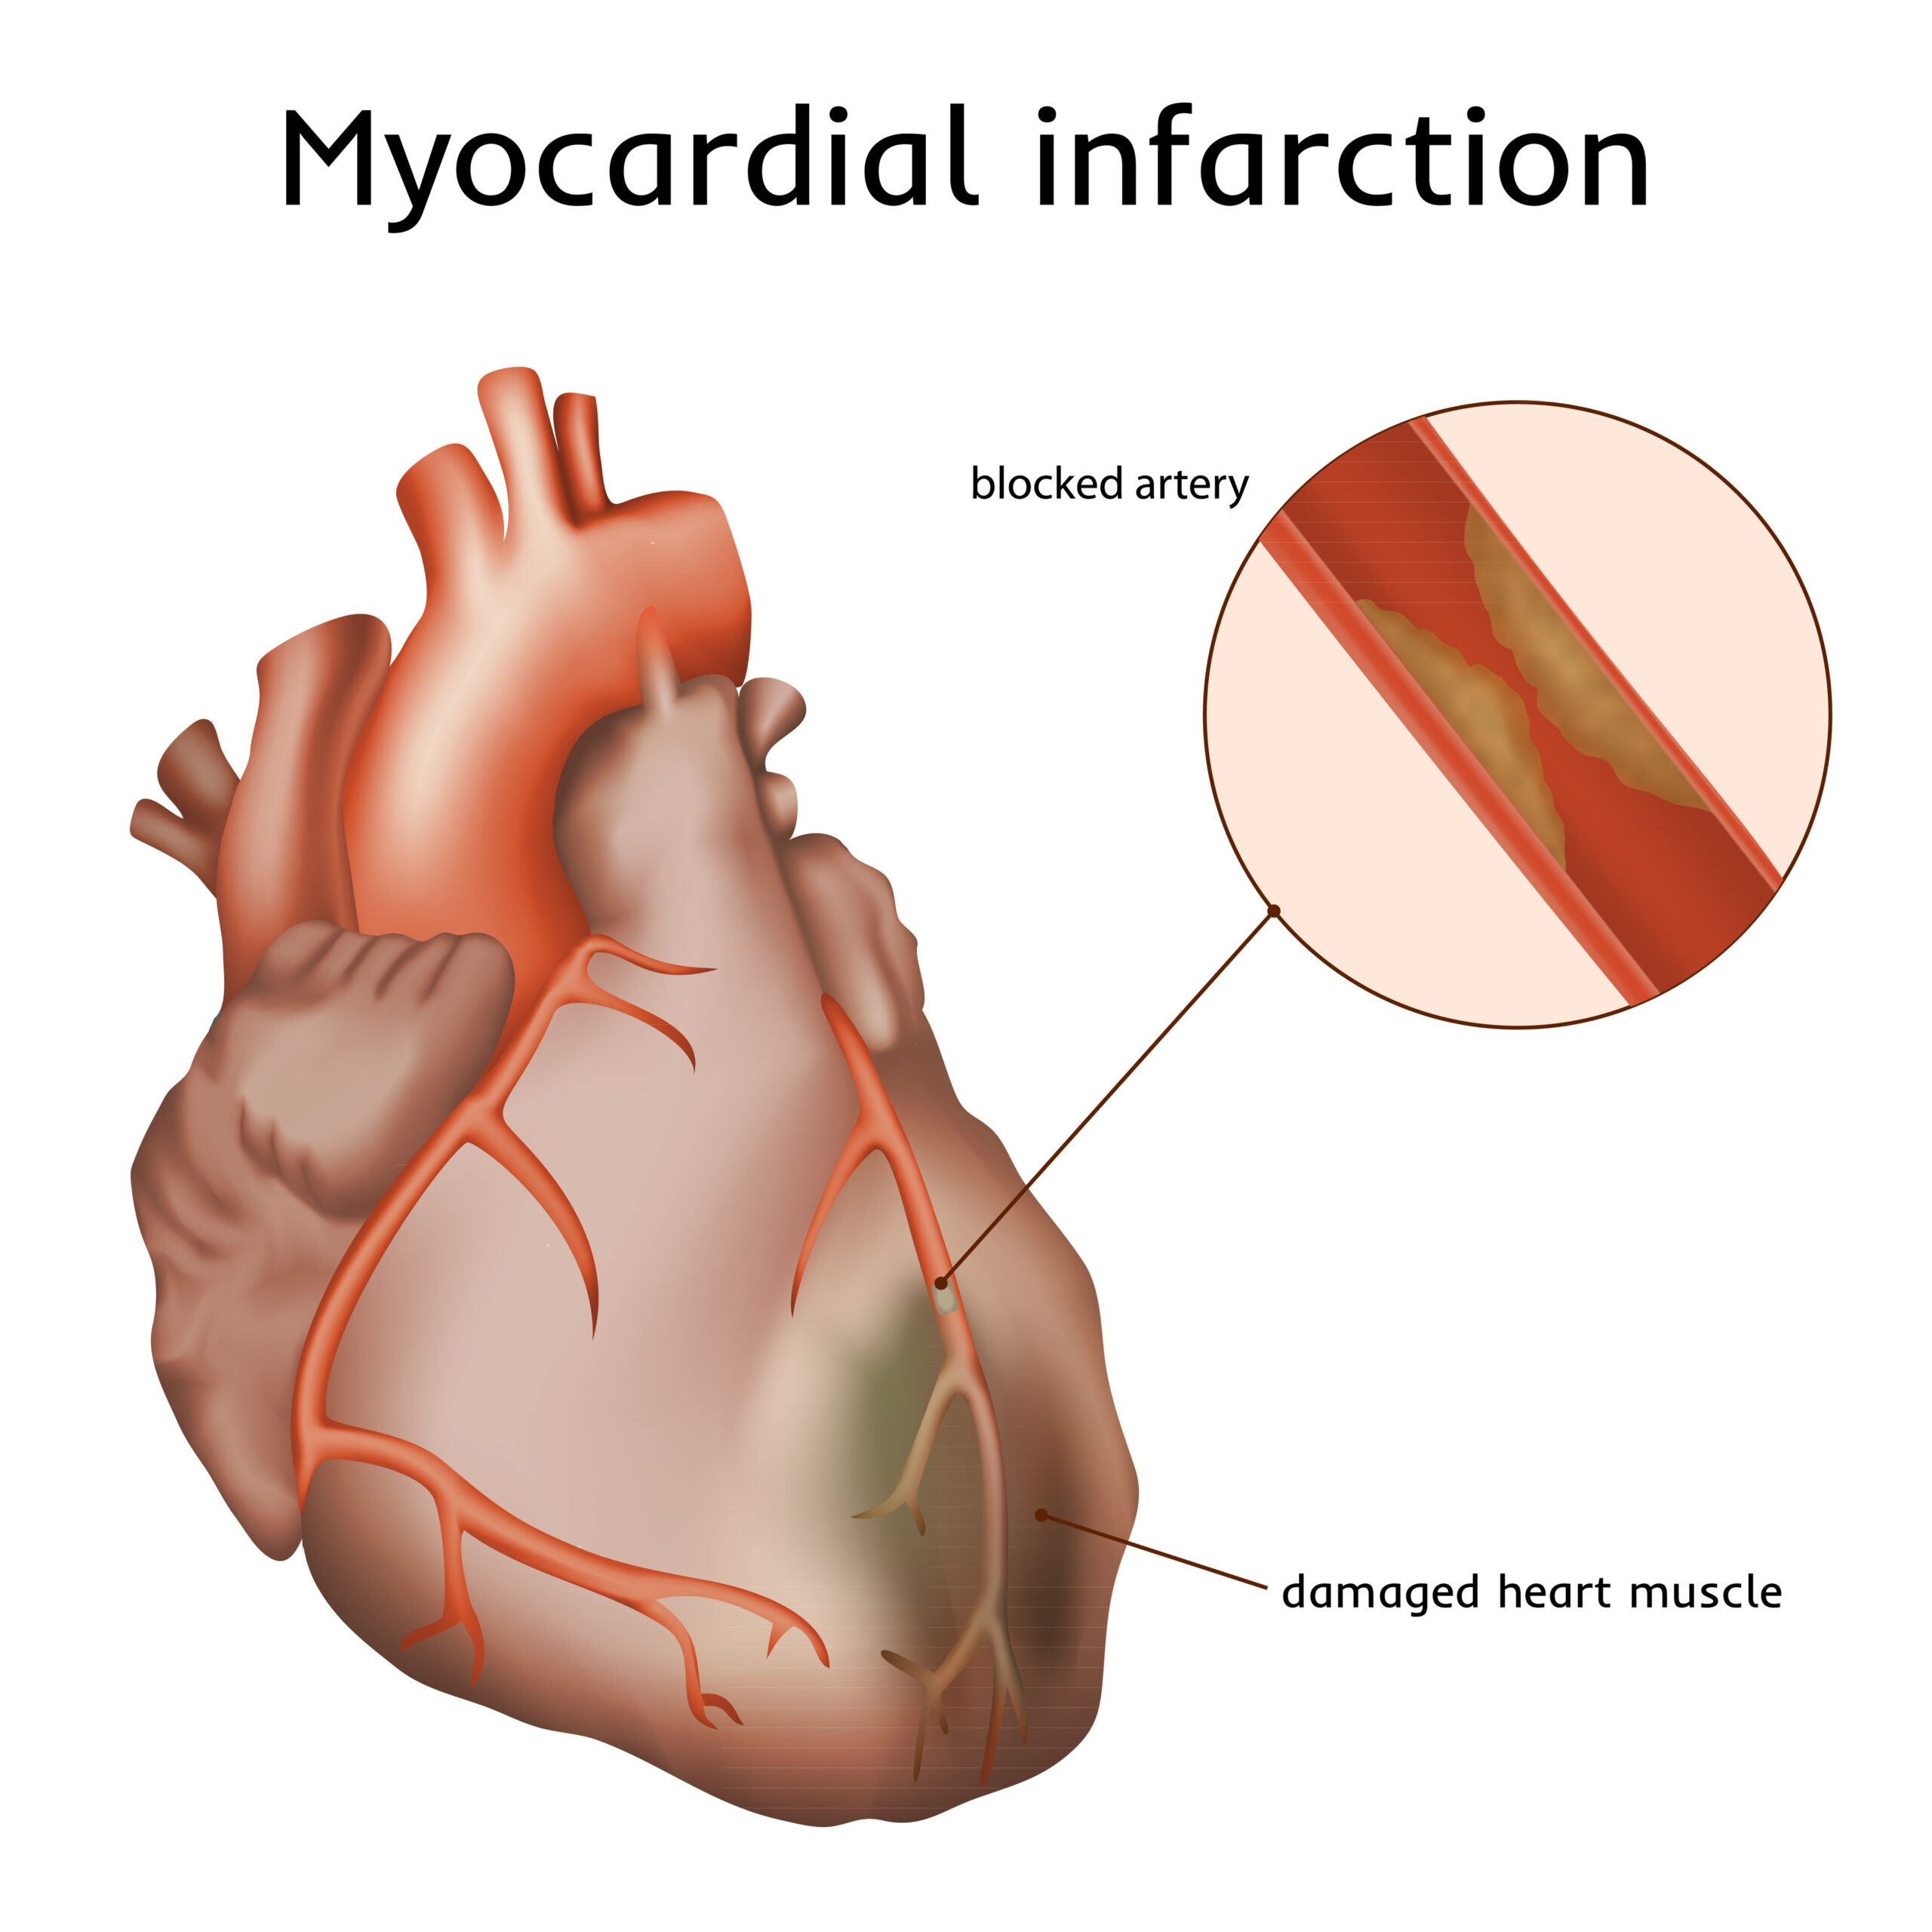 Diagram illustrating a blocked artery and a damaged muscle of the heart.